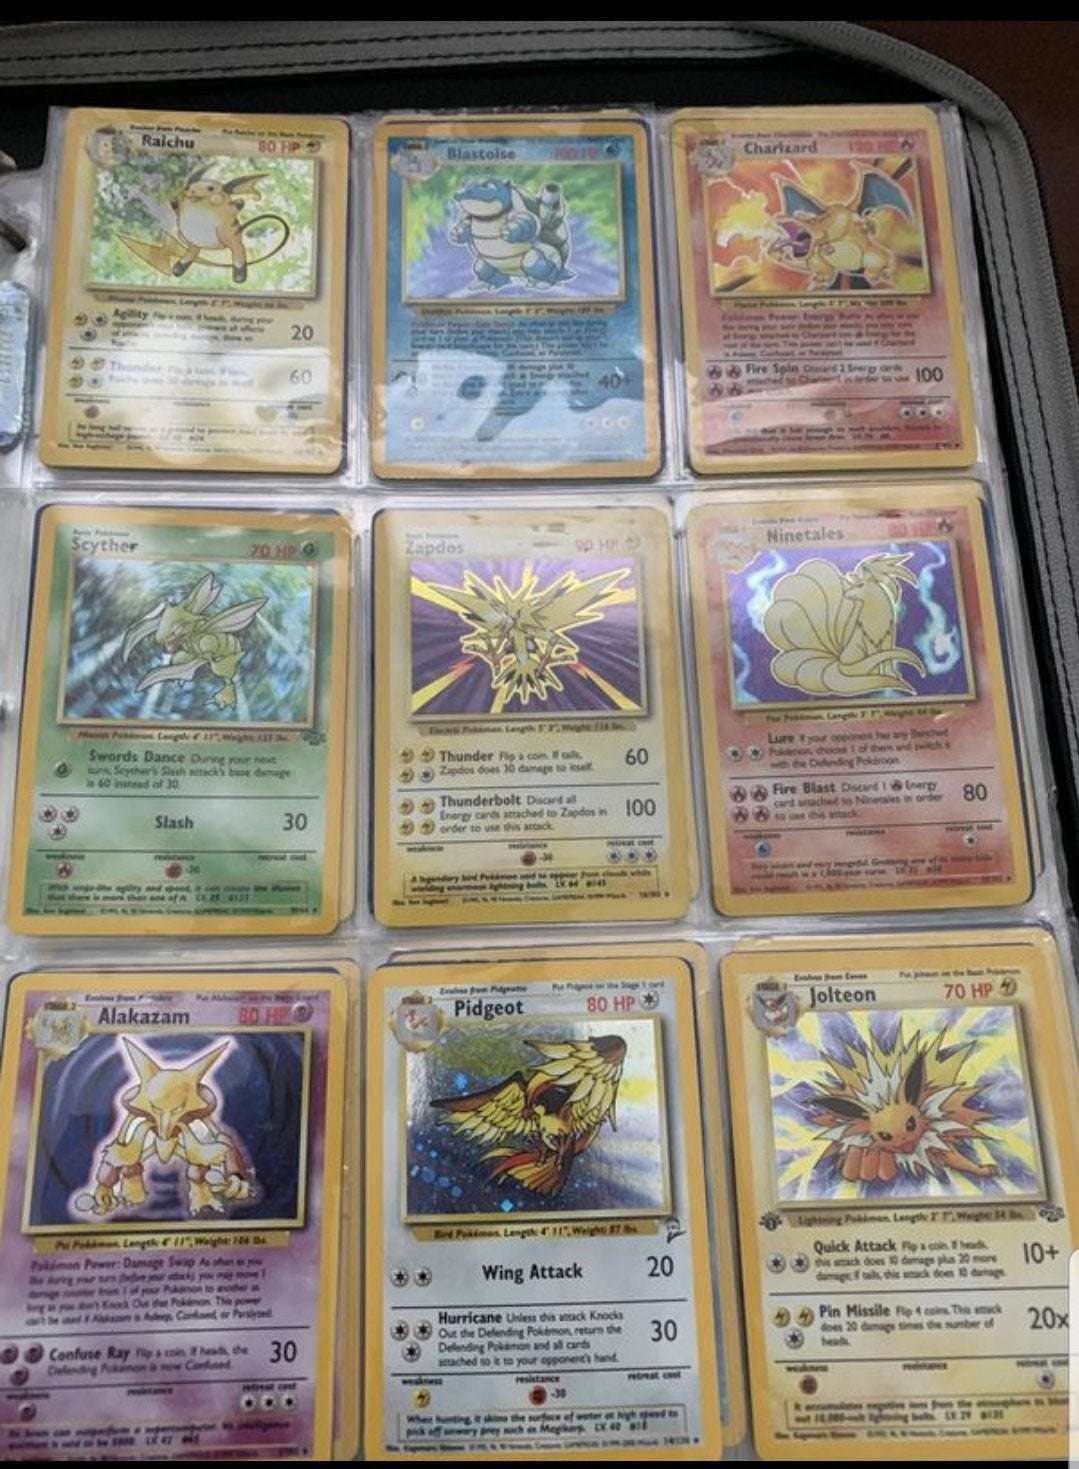 Are these Pokemon cards worth anything? : whatsthisworth